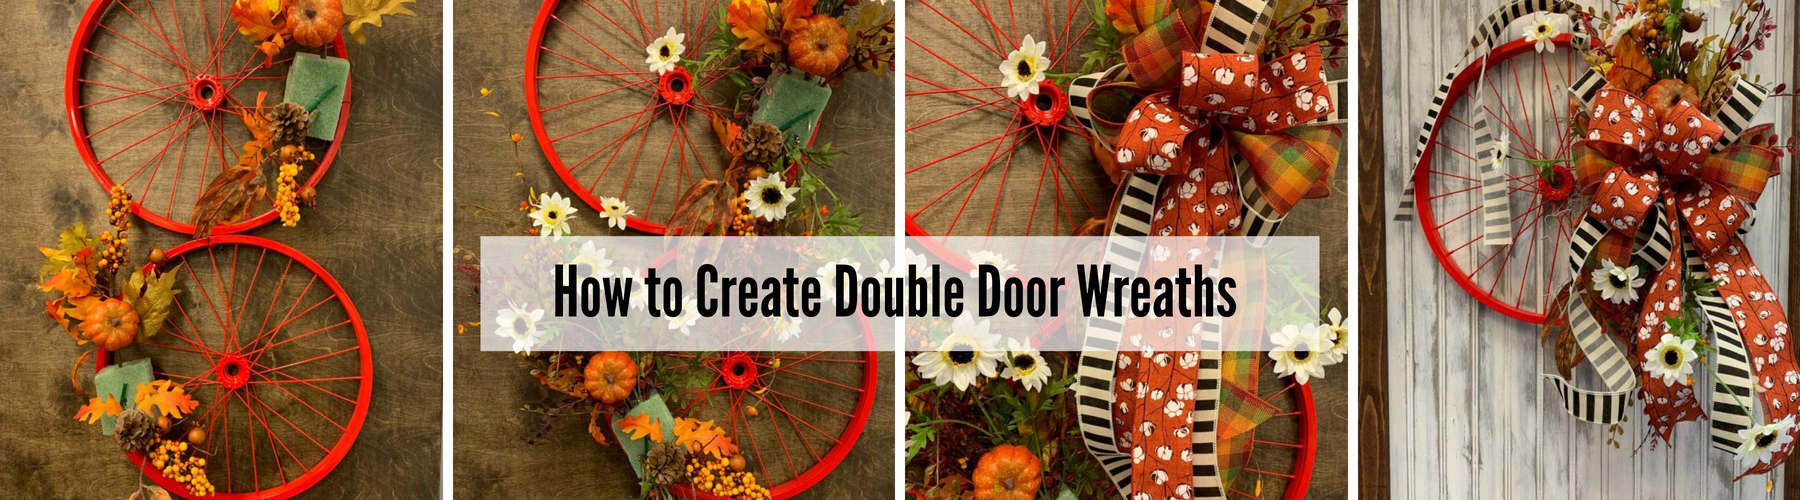 how to create double door wreaths using a bicycle wheel